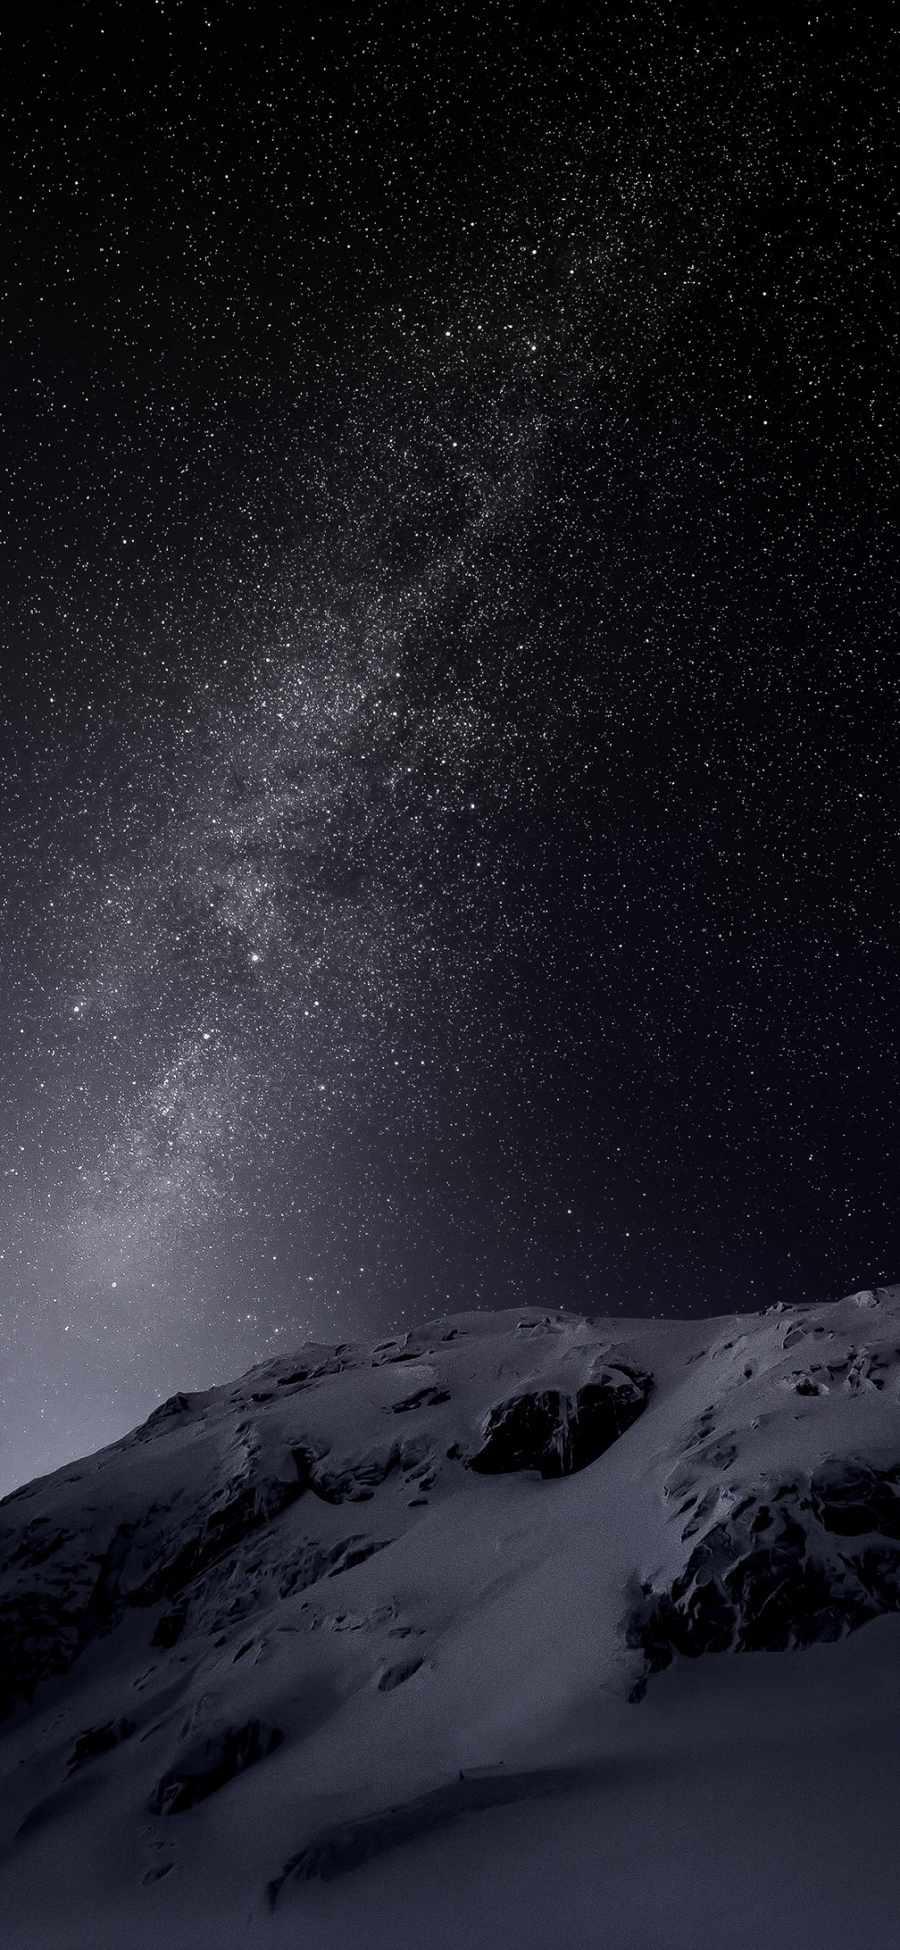 stars over snowy slope iPhone Wallpaper